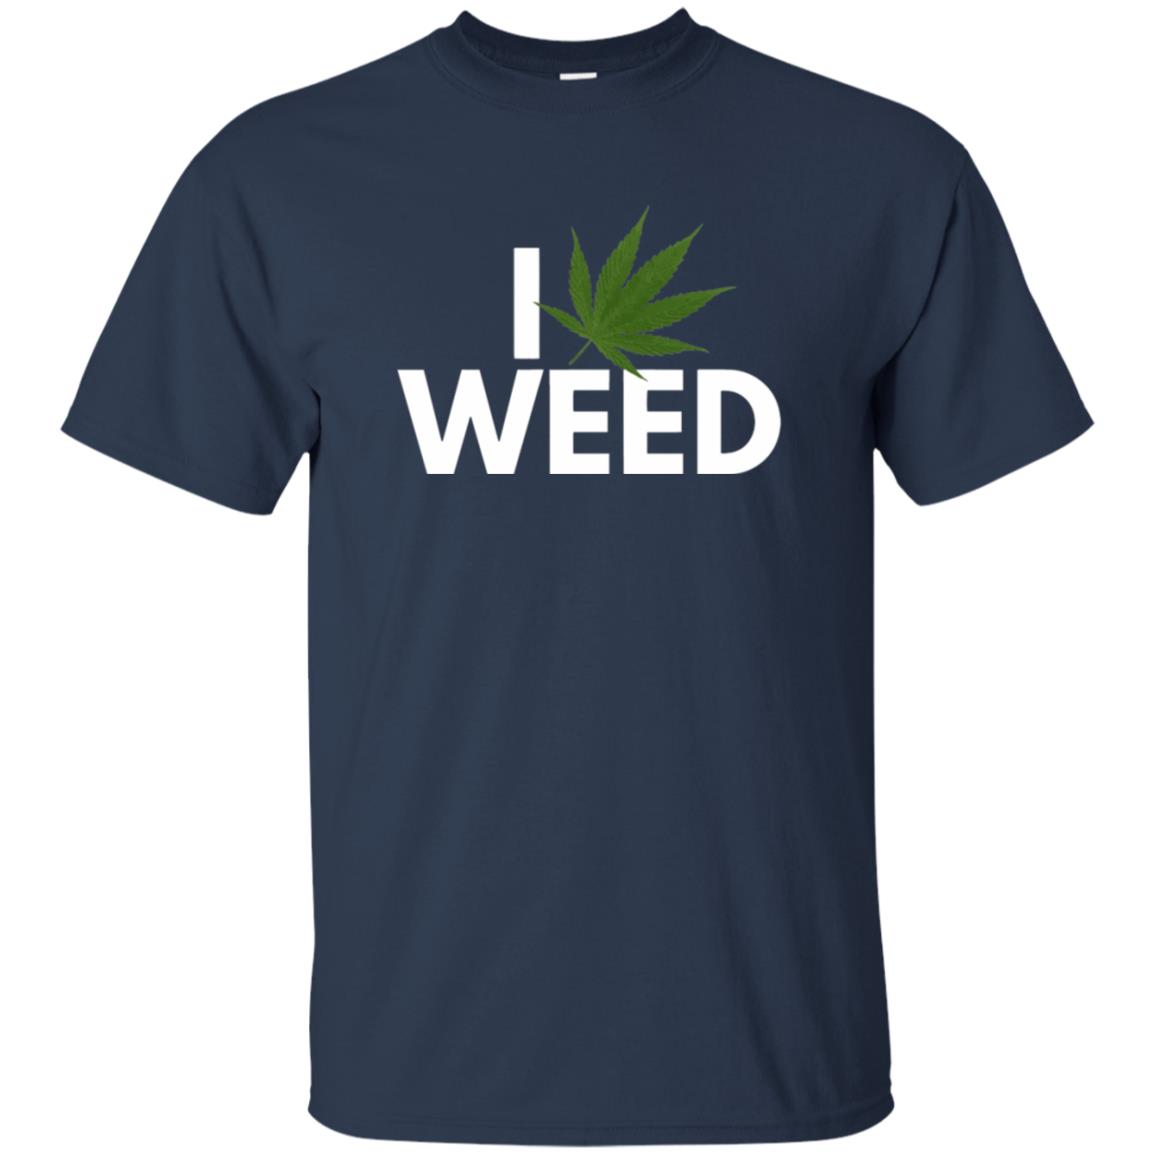 I Love Weed Shirt - 10% Off - FavorMerch